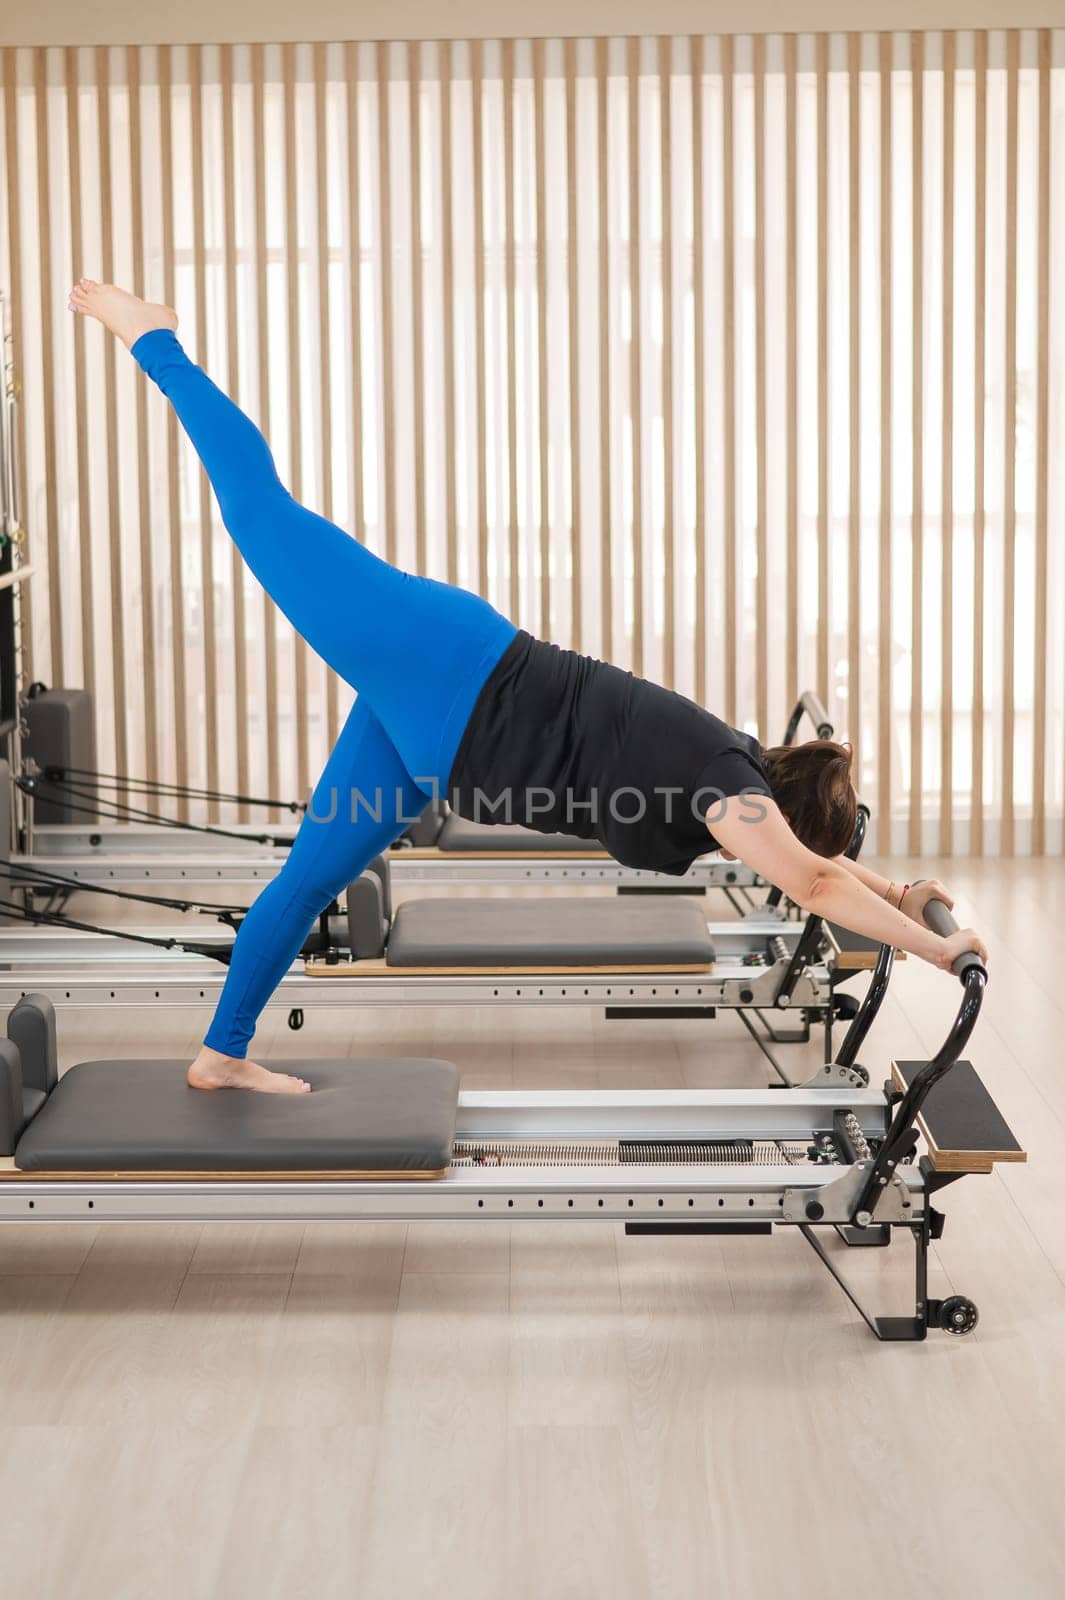 Overweight caucasian woman doing pilates exercises on a reformer. by mrwed54